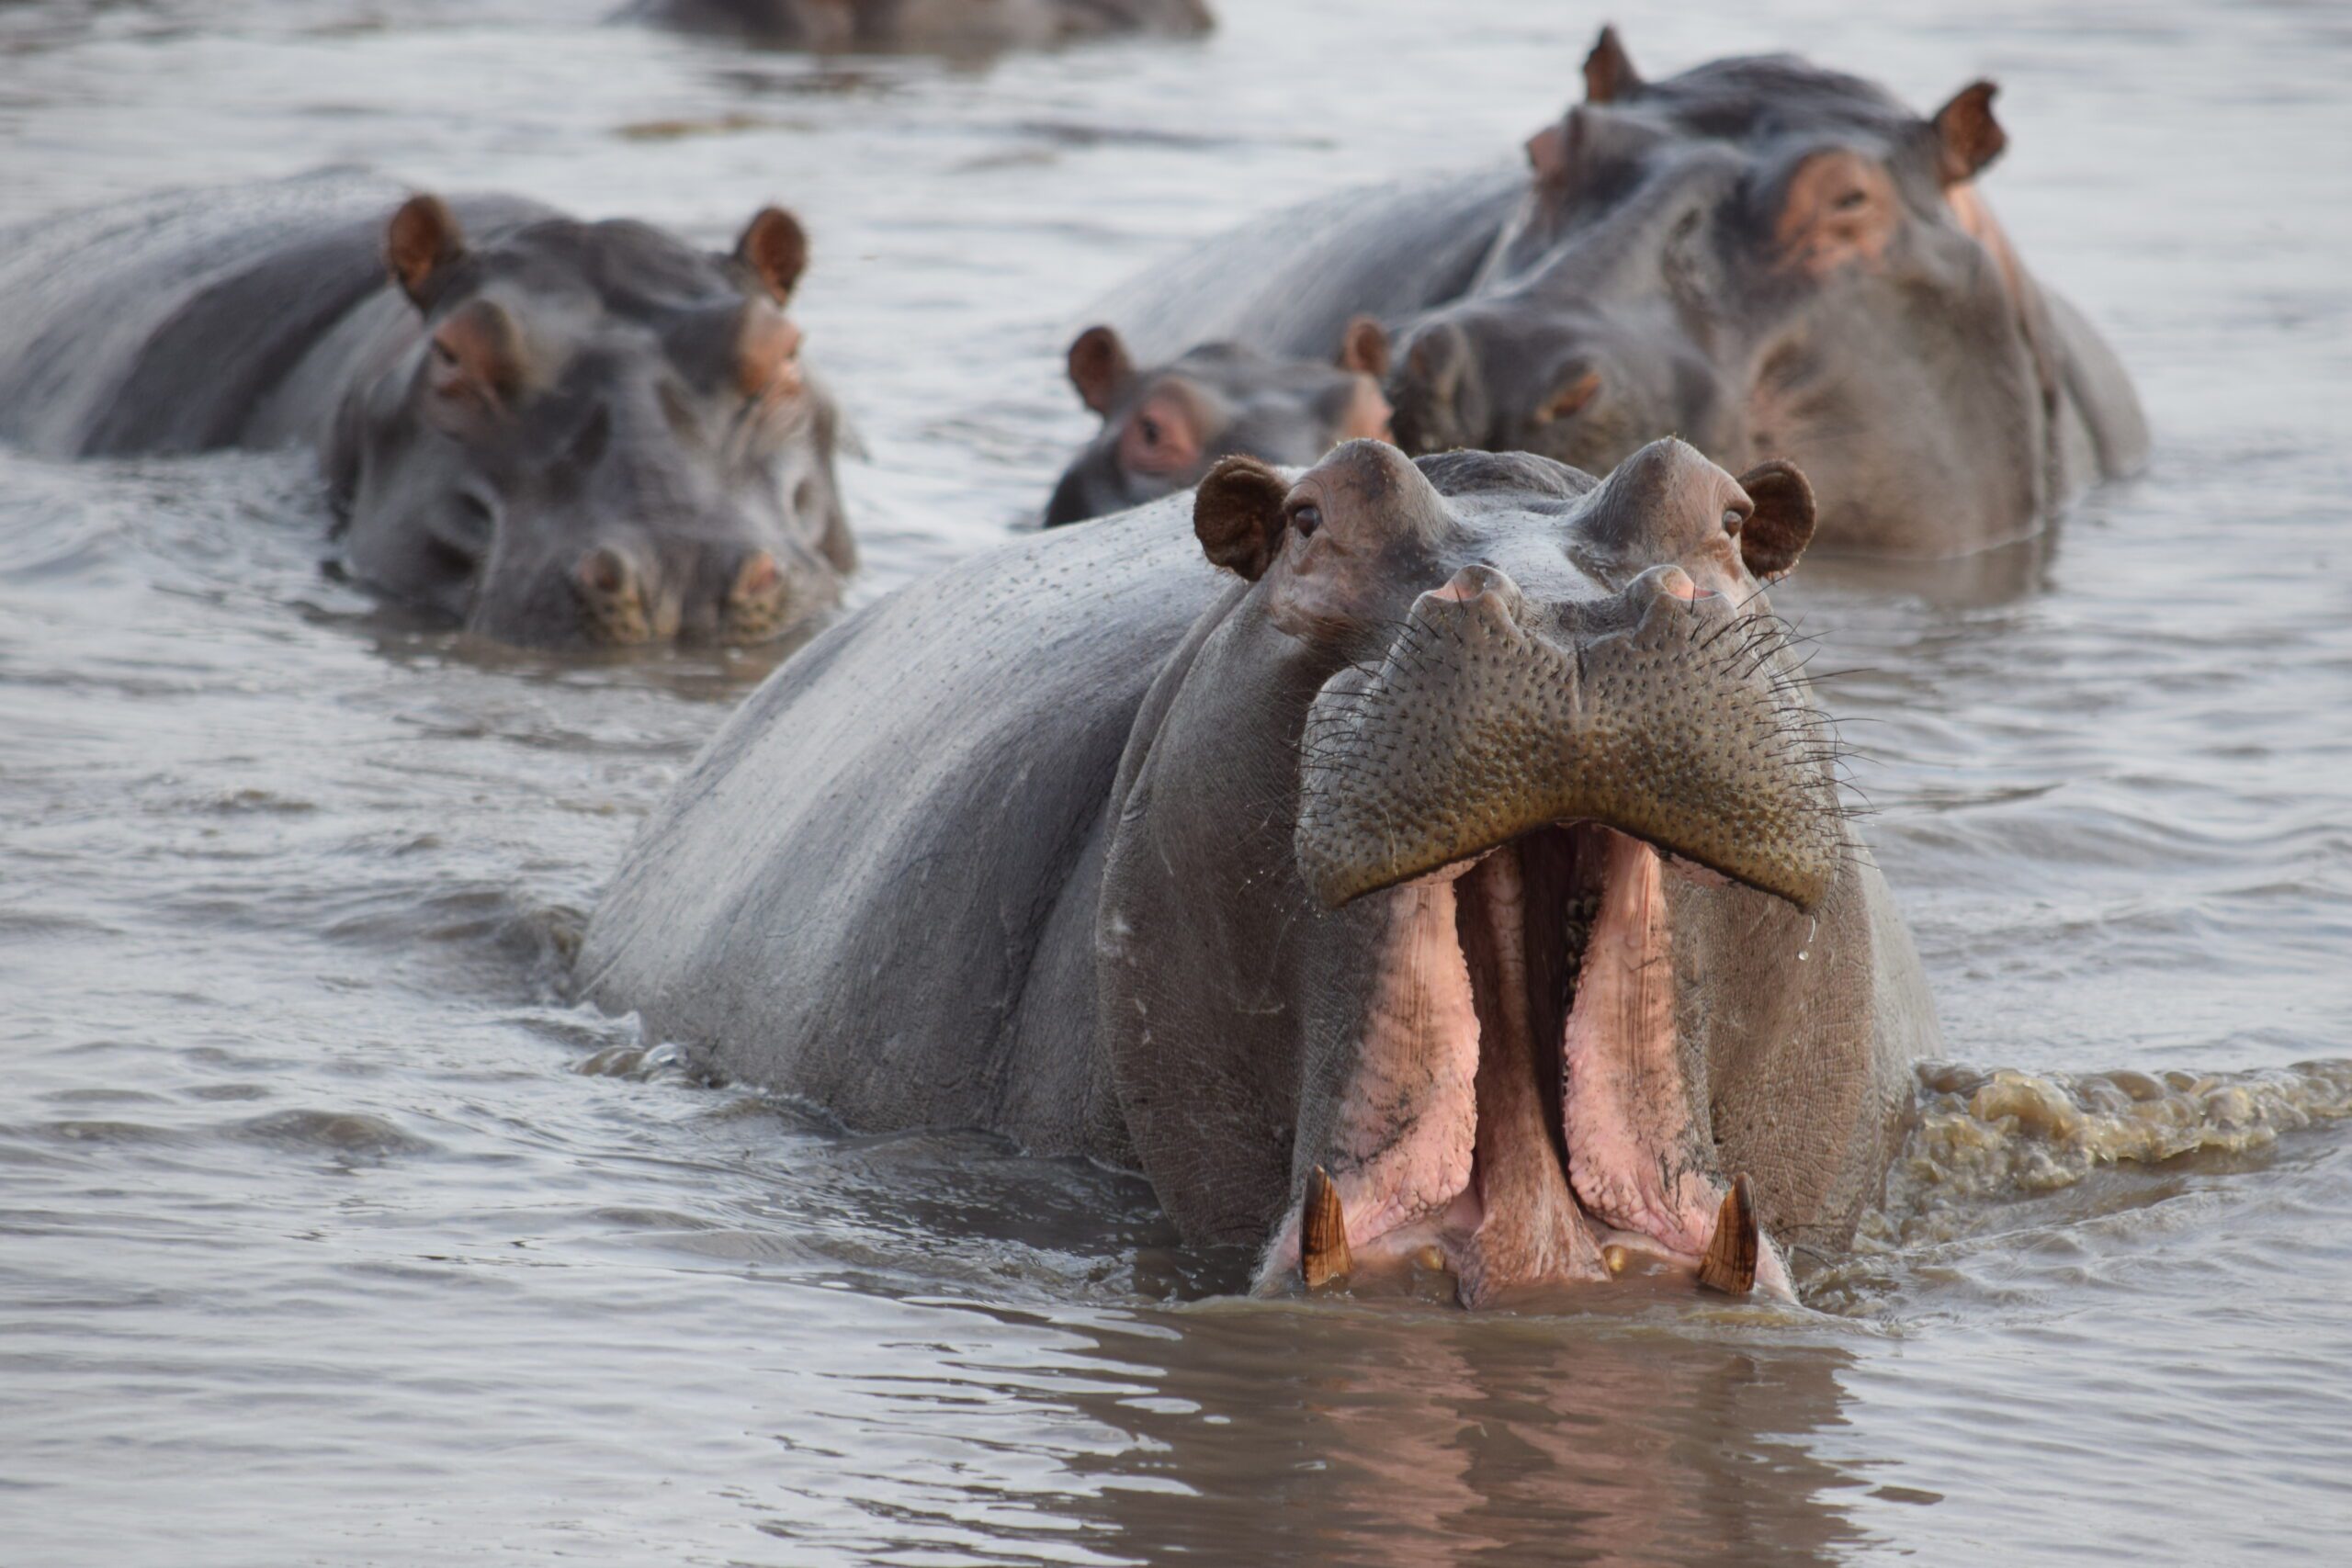 group of 4 hippos in the water with the one hippo in front yawning. 